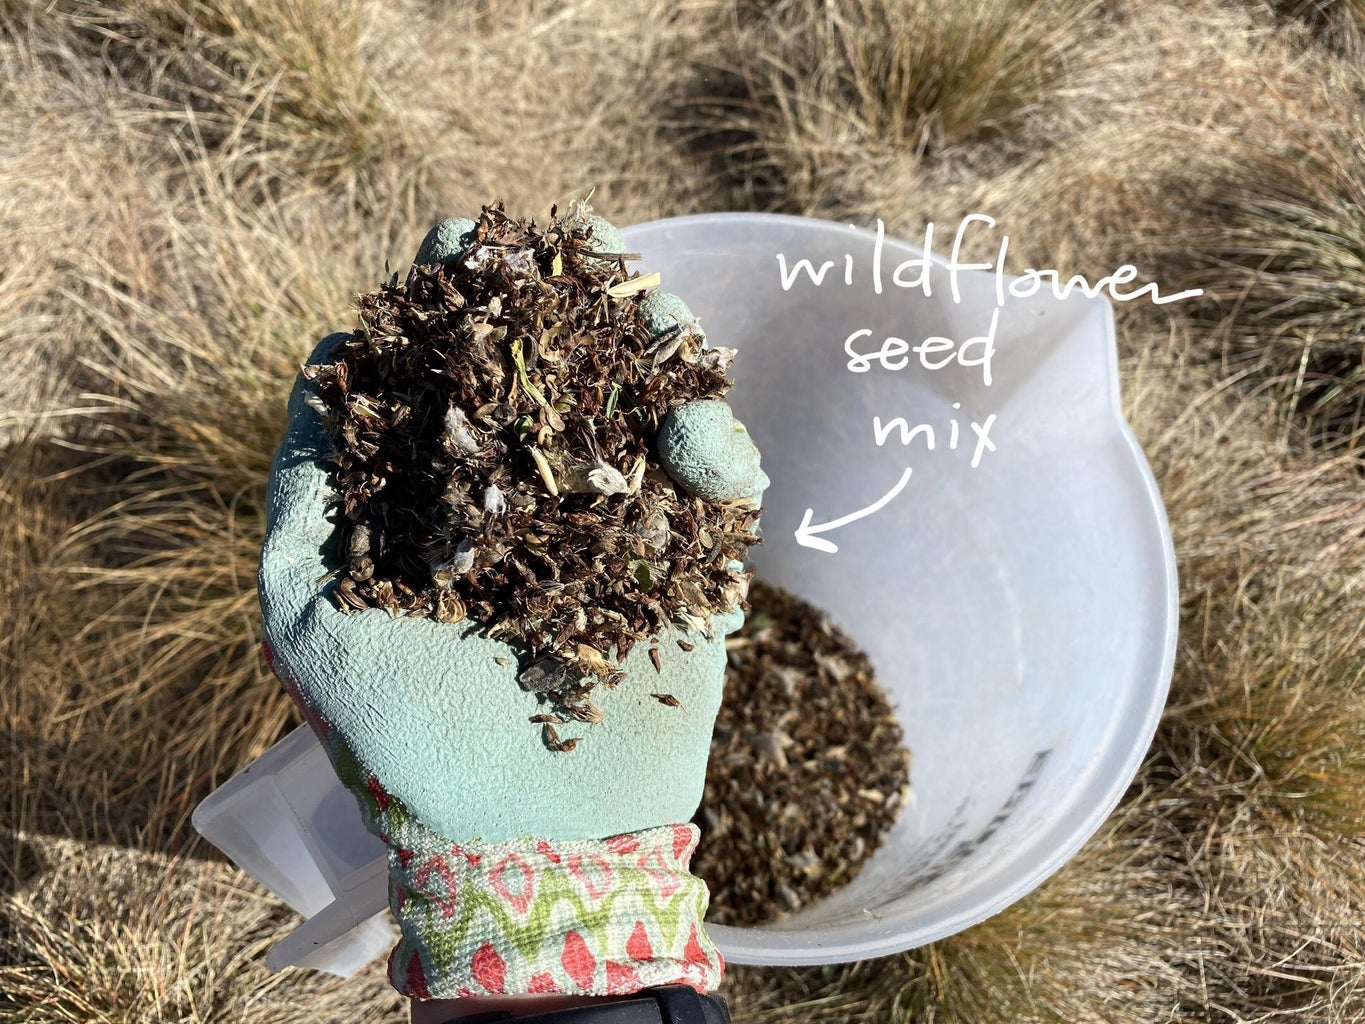 How to Gather Seeds